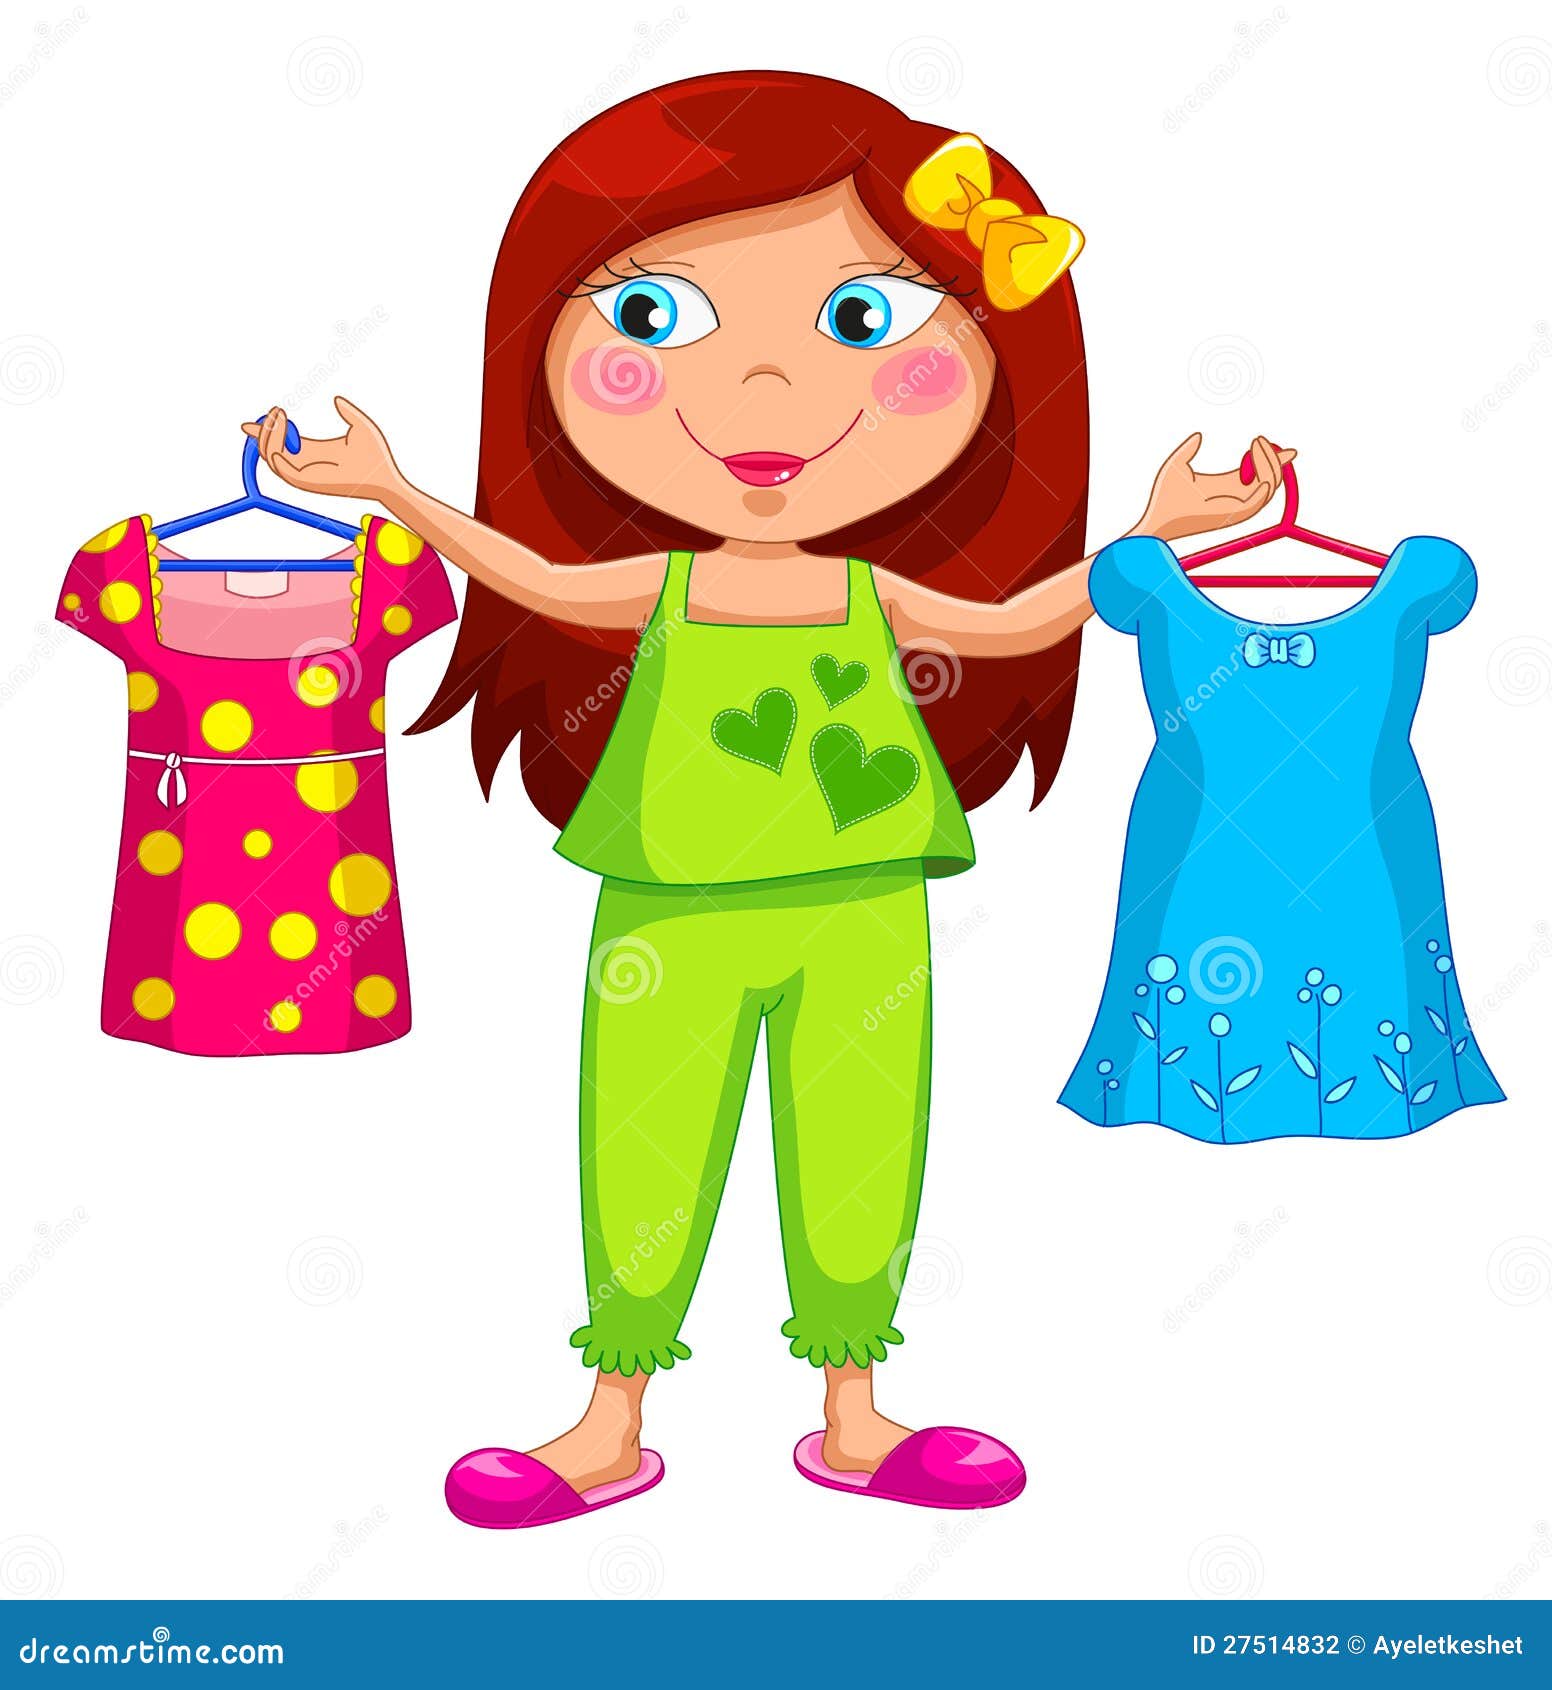 getting dressed clipart - photo #37